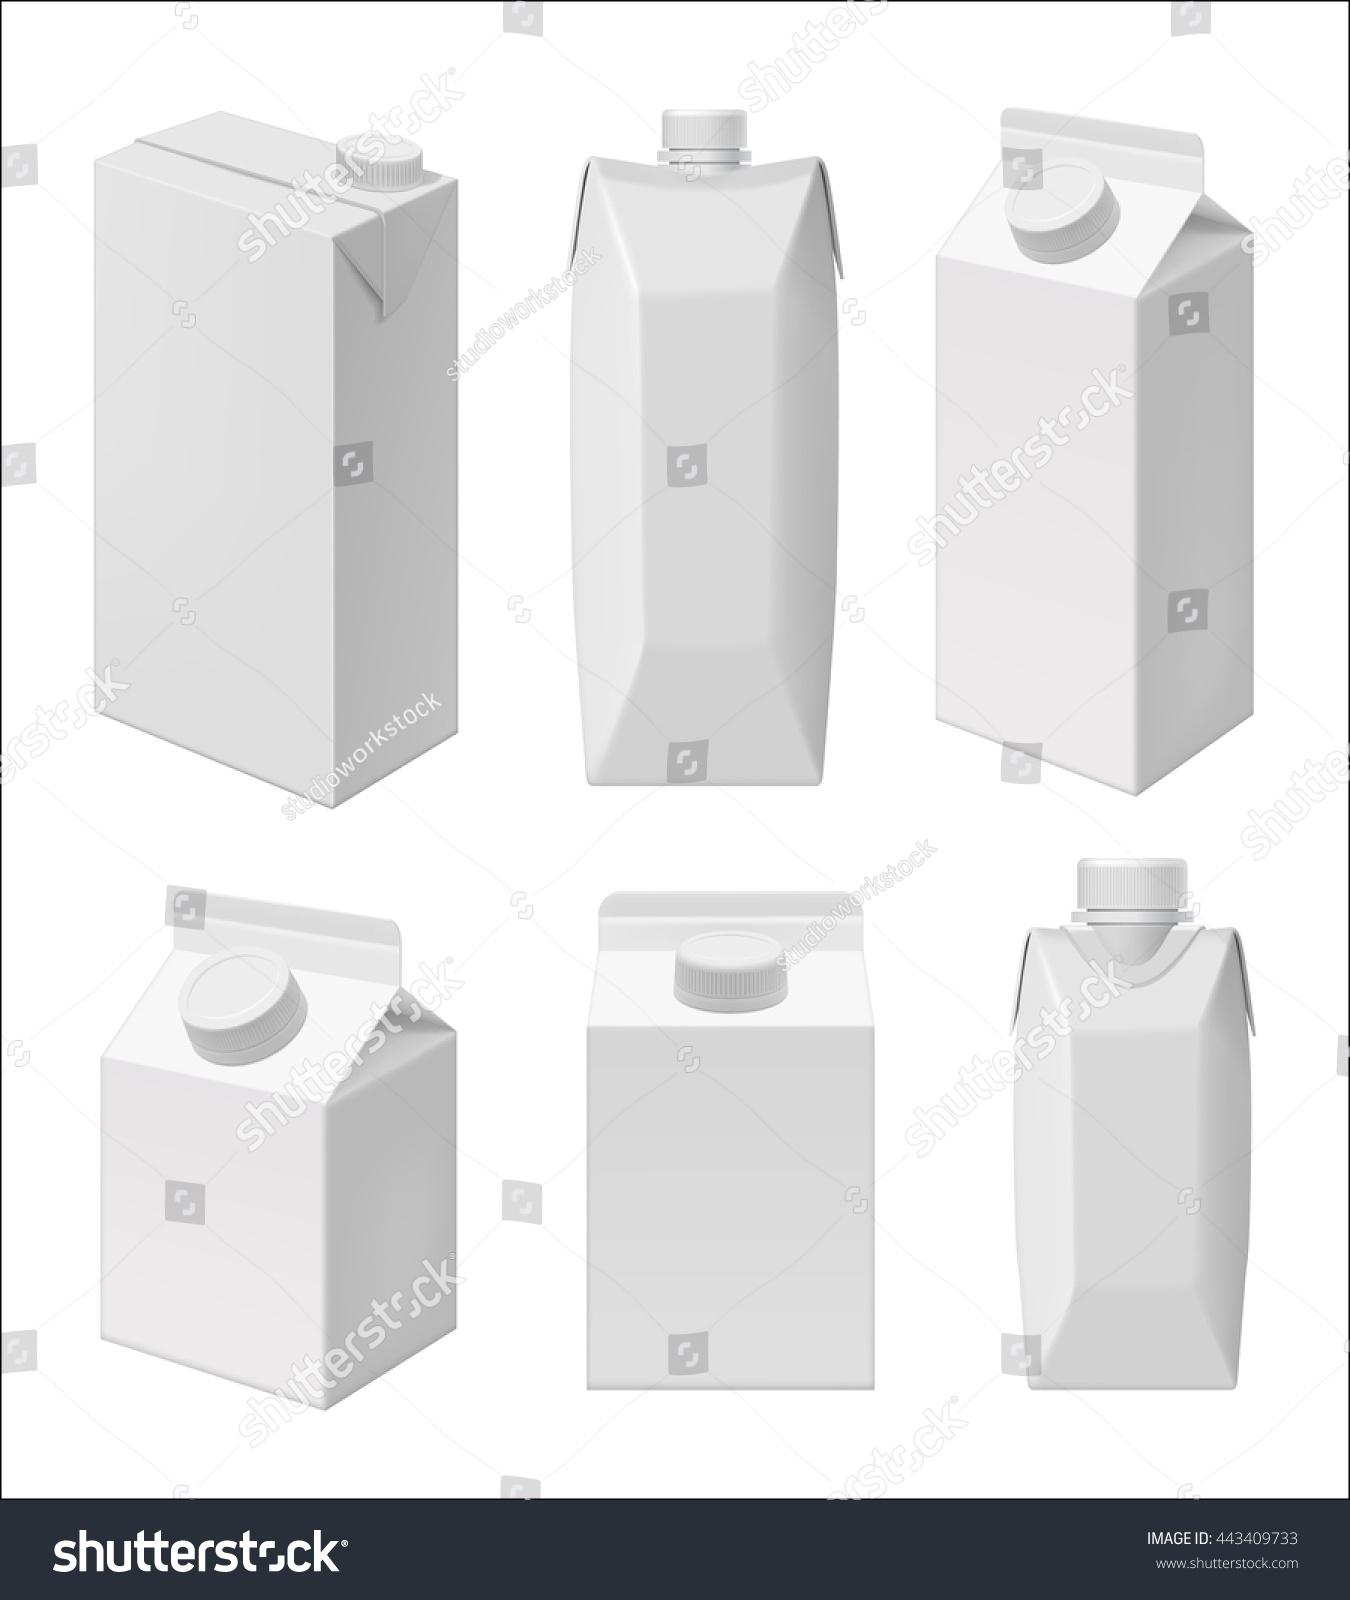 SVG of Carton milk or juice pack template. Blank packaging isolated on white background. Mock up layout design. Drink carton packaging vector isolated. Juice or milk packaging layout. Milk carton box. svg